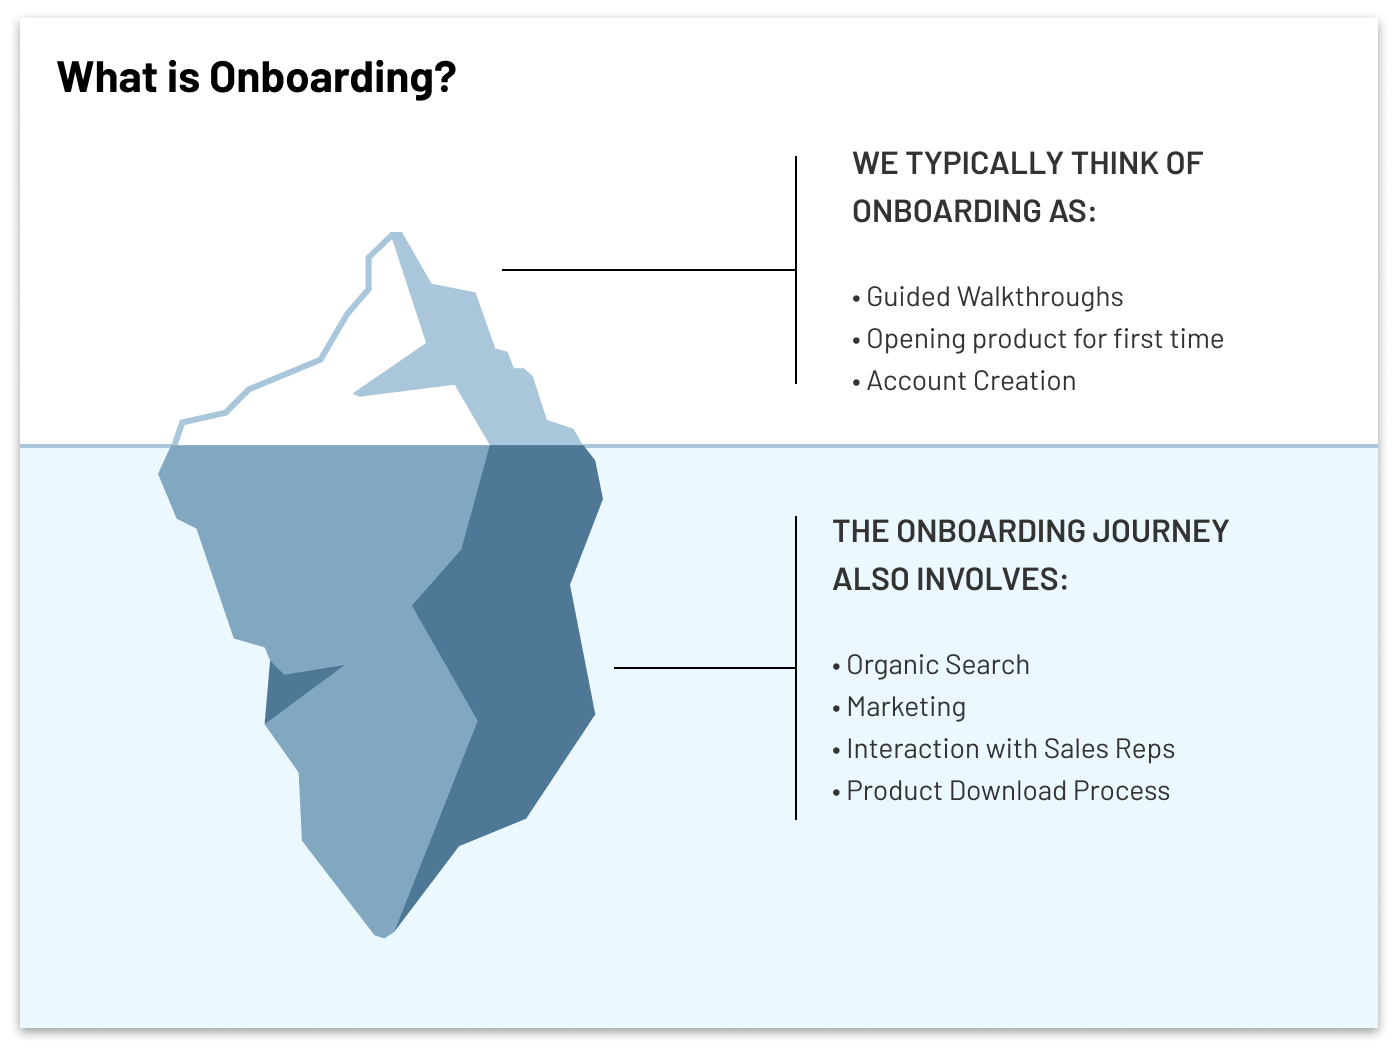 An iceberg, showing there is more to the onboarding process than people think.